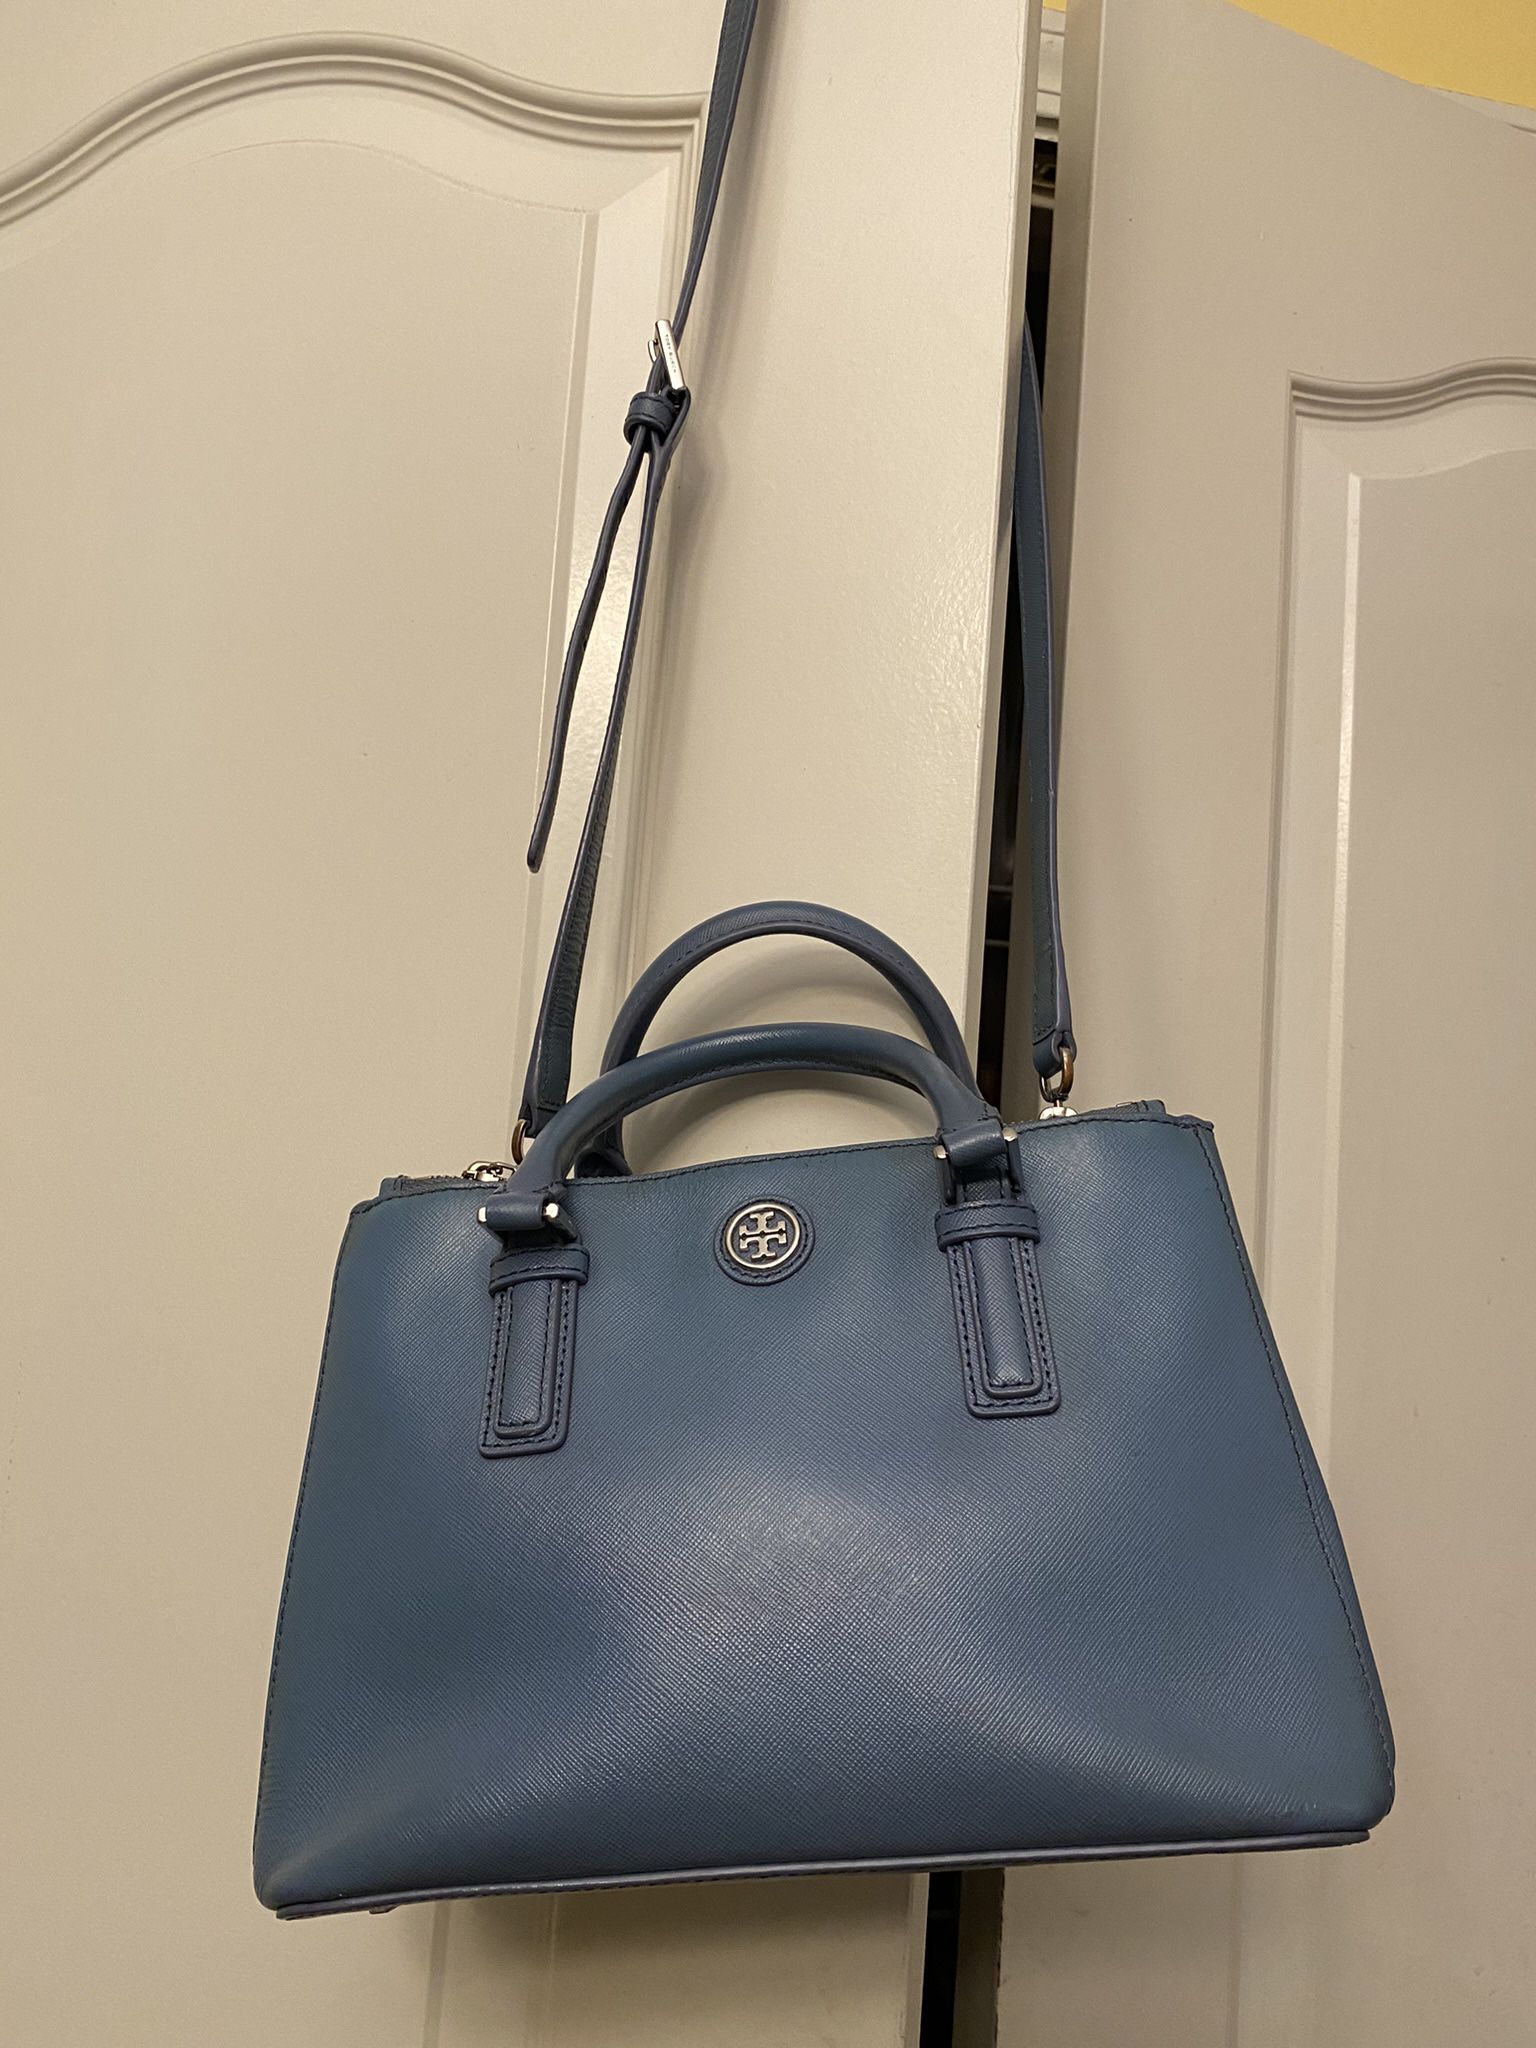 Tory Burch Robinson Stitched Double-Zip Tote in Blue